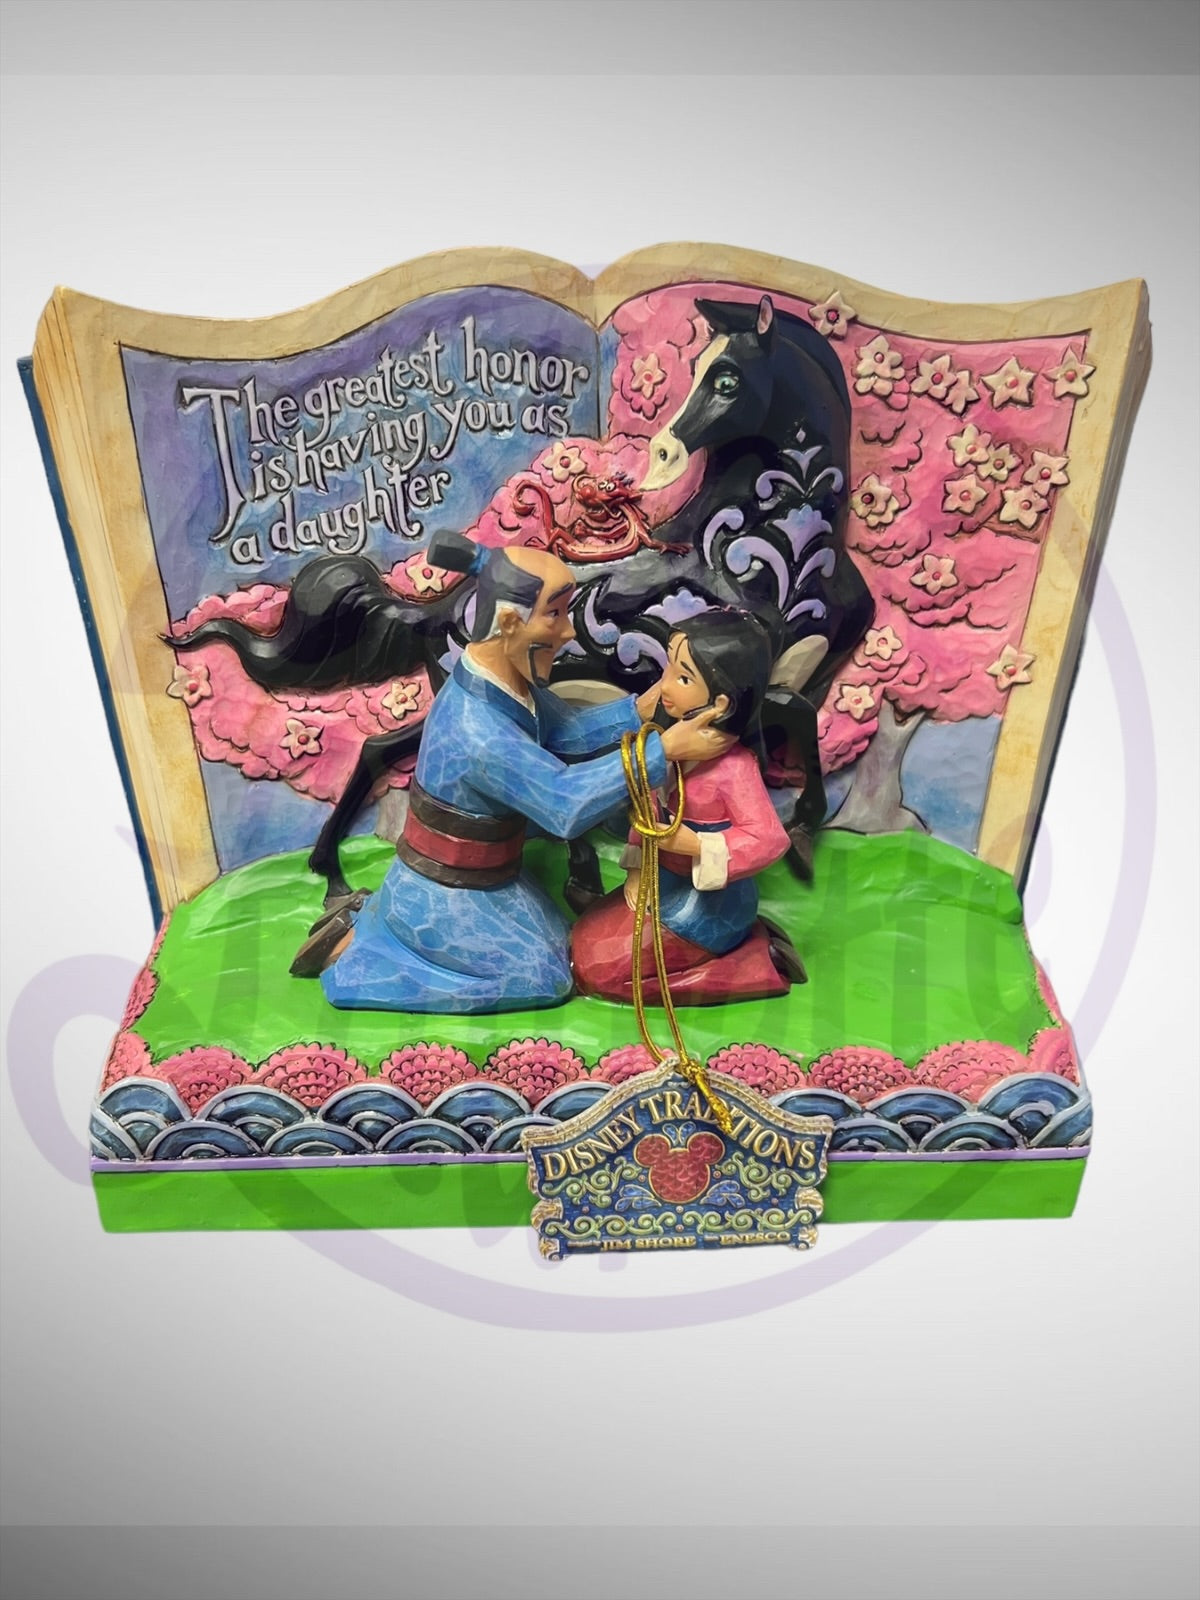 Jim Shore Disney Traditions - The Greatest Honor is Having You as a Daughter Mulan Storybook Figurine